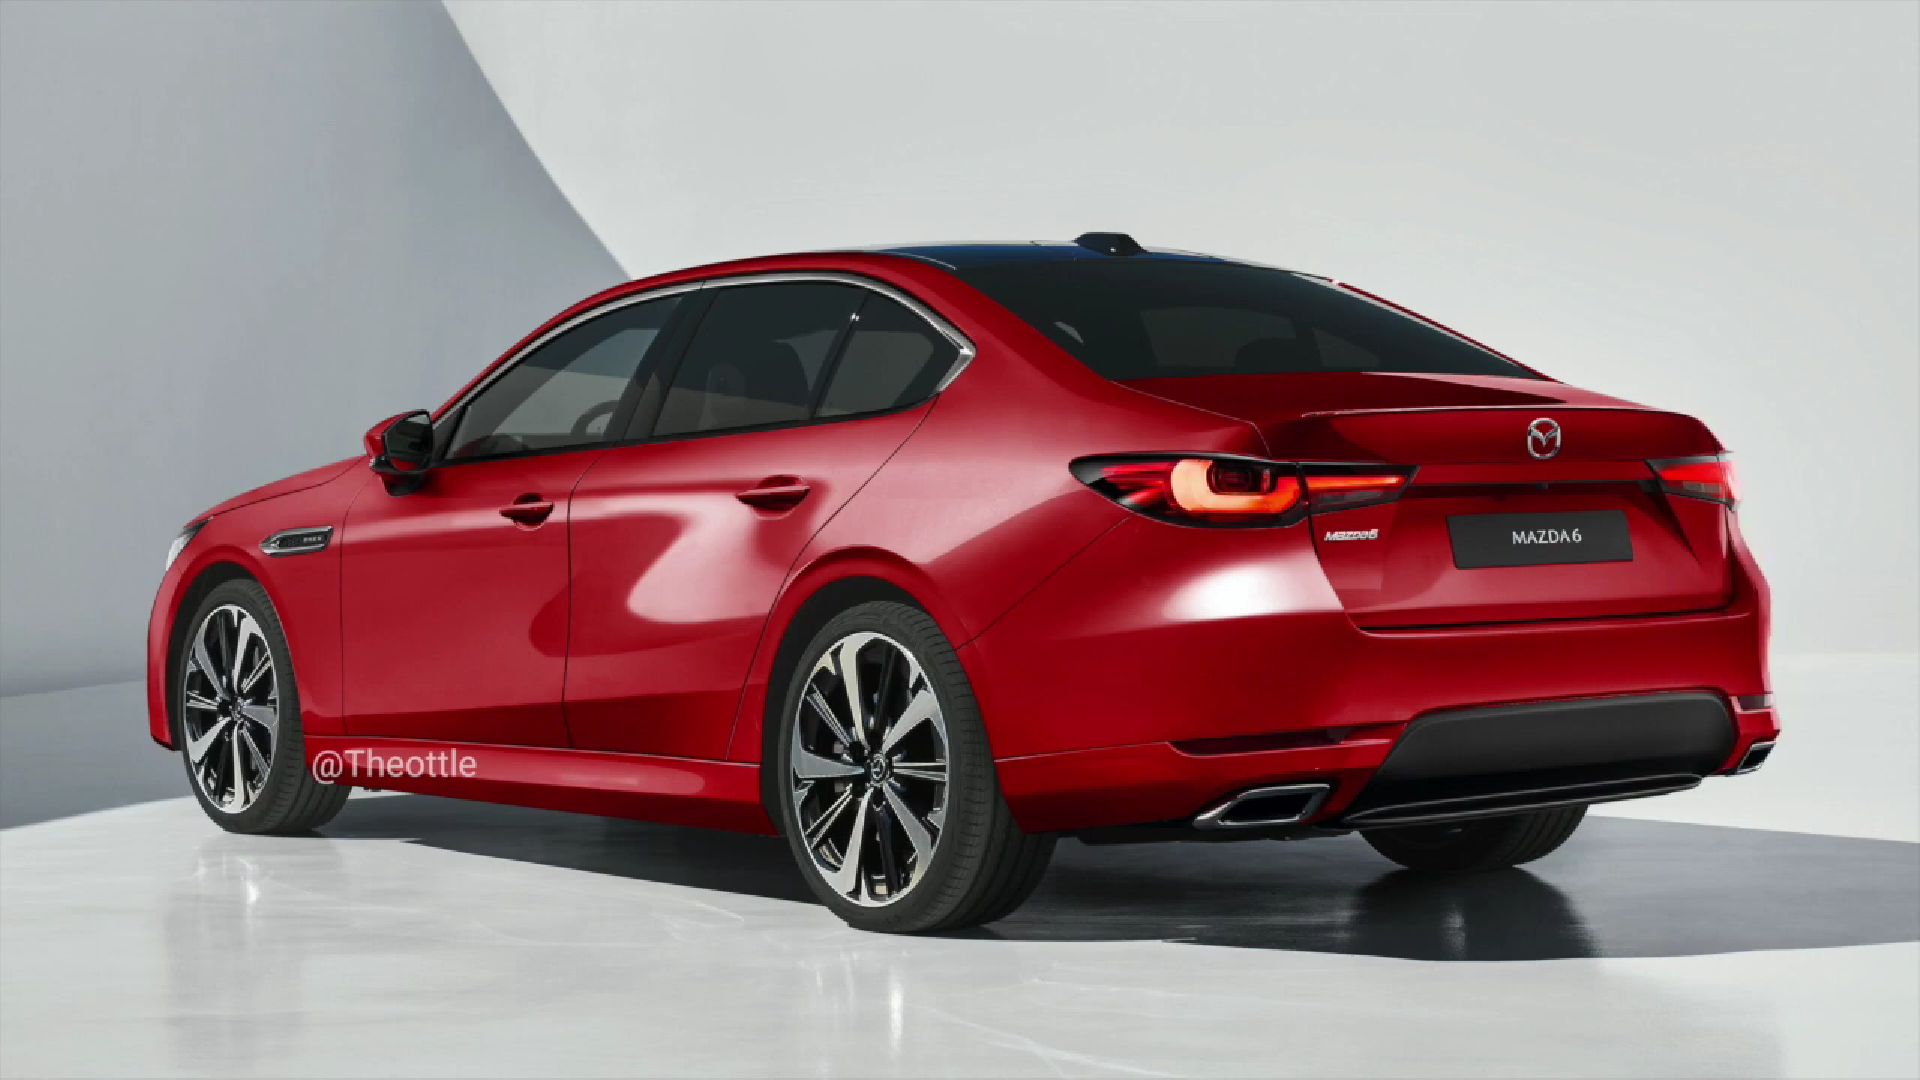 2025-mazda6-sedan-speculatively-rendered-new-generation-may-go-rwd-with-i6-engines-4.jpg